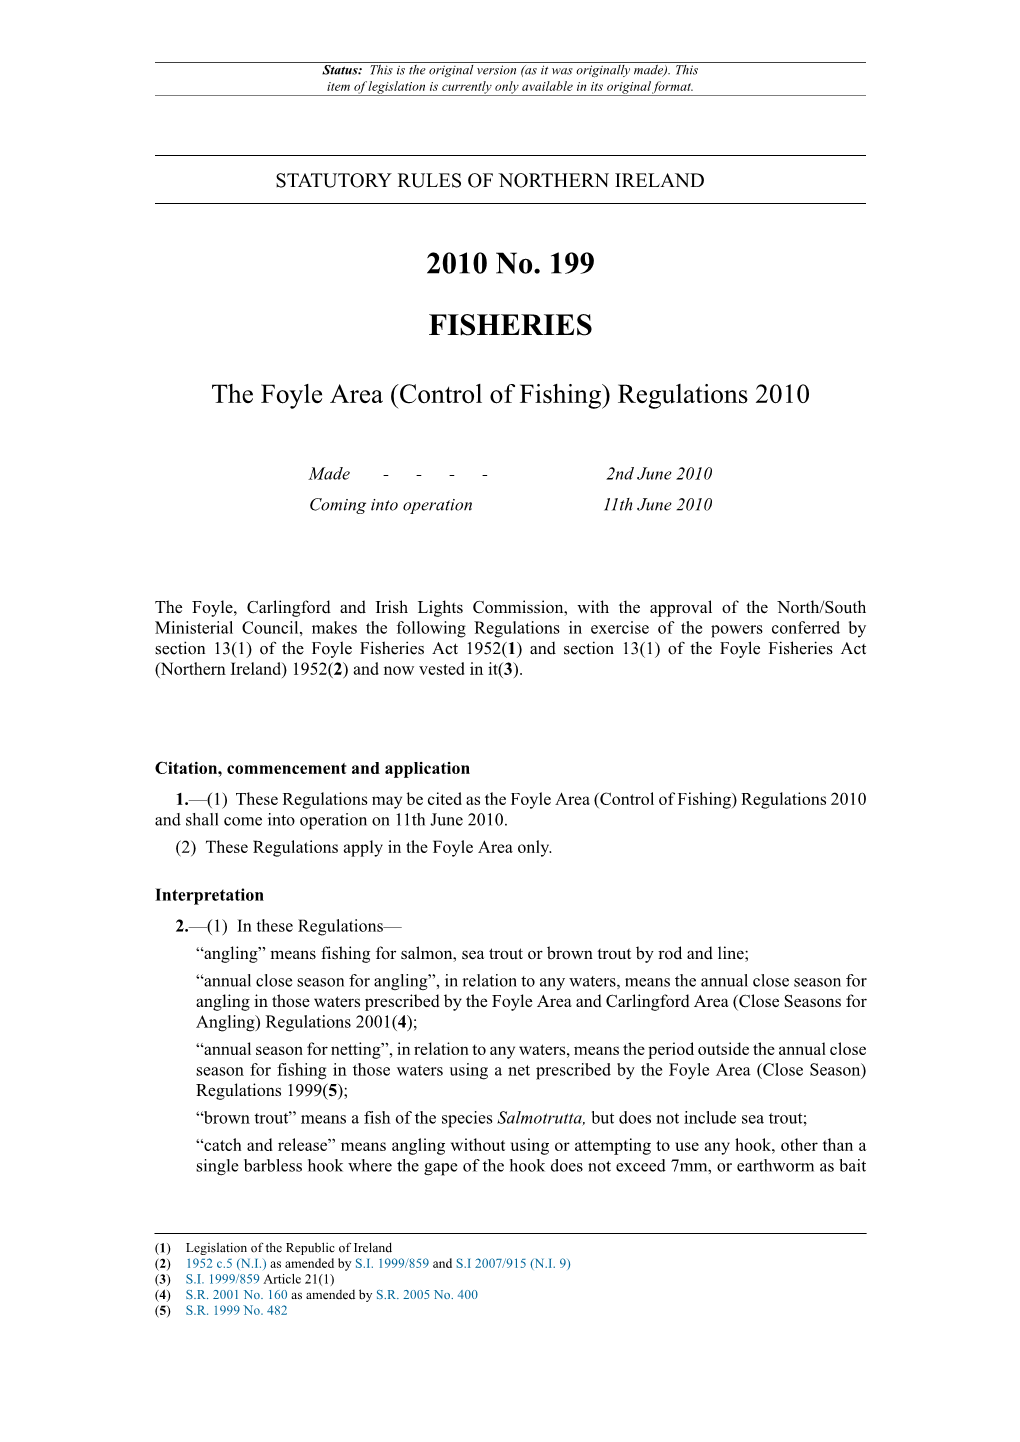 The Foyle Area (Control of Fishing) Regulations 2010